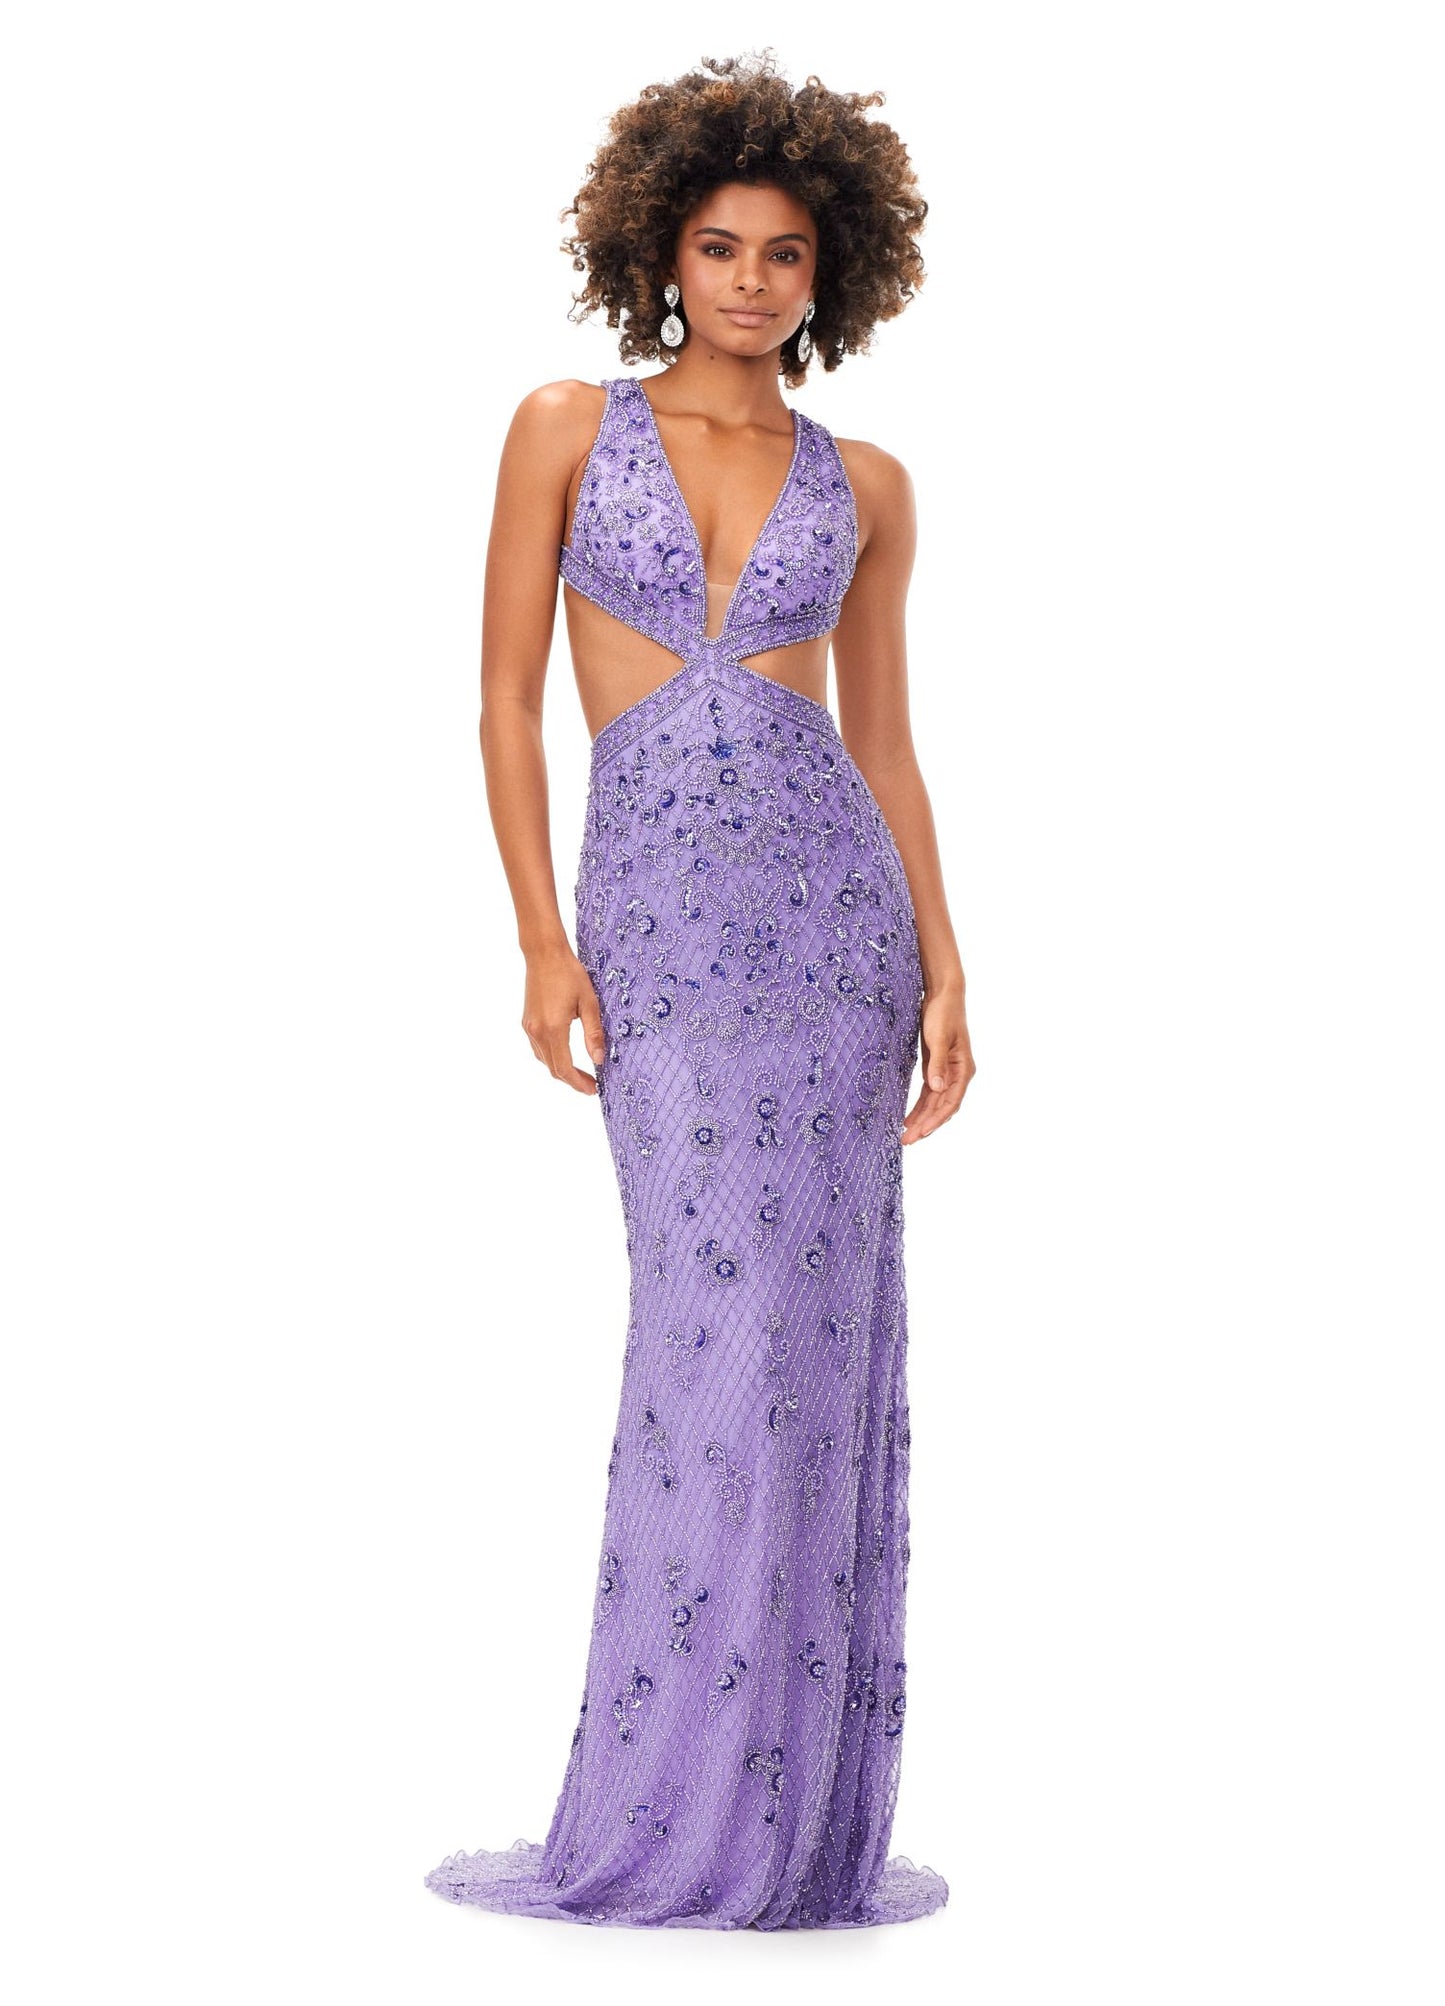 Ashley Lauren 11366 Turn heads in this v-neck gown with side cut outs and an intricate bead pattern. The gown is complete with a lace up open back and sweep train. V-Neckline Cut Outs Lace Up Back Sweep Train COLORS: Gold, Red, Lilac, Peacock